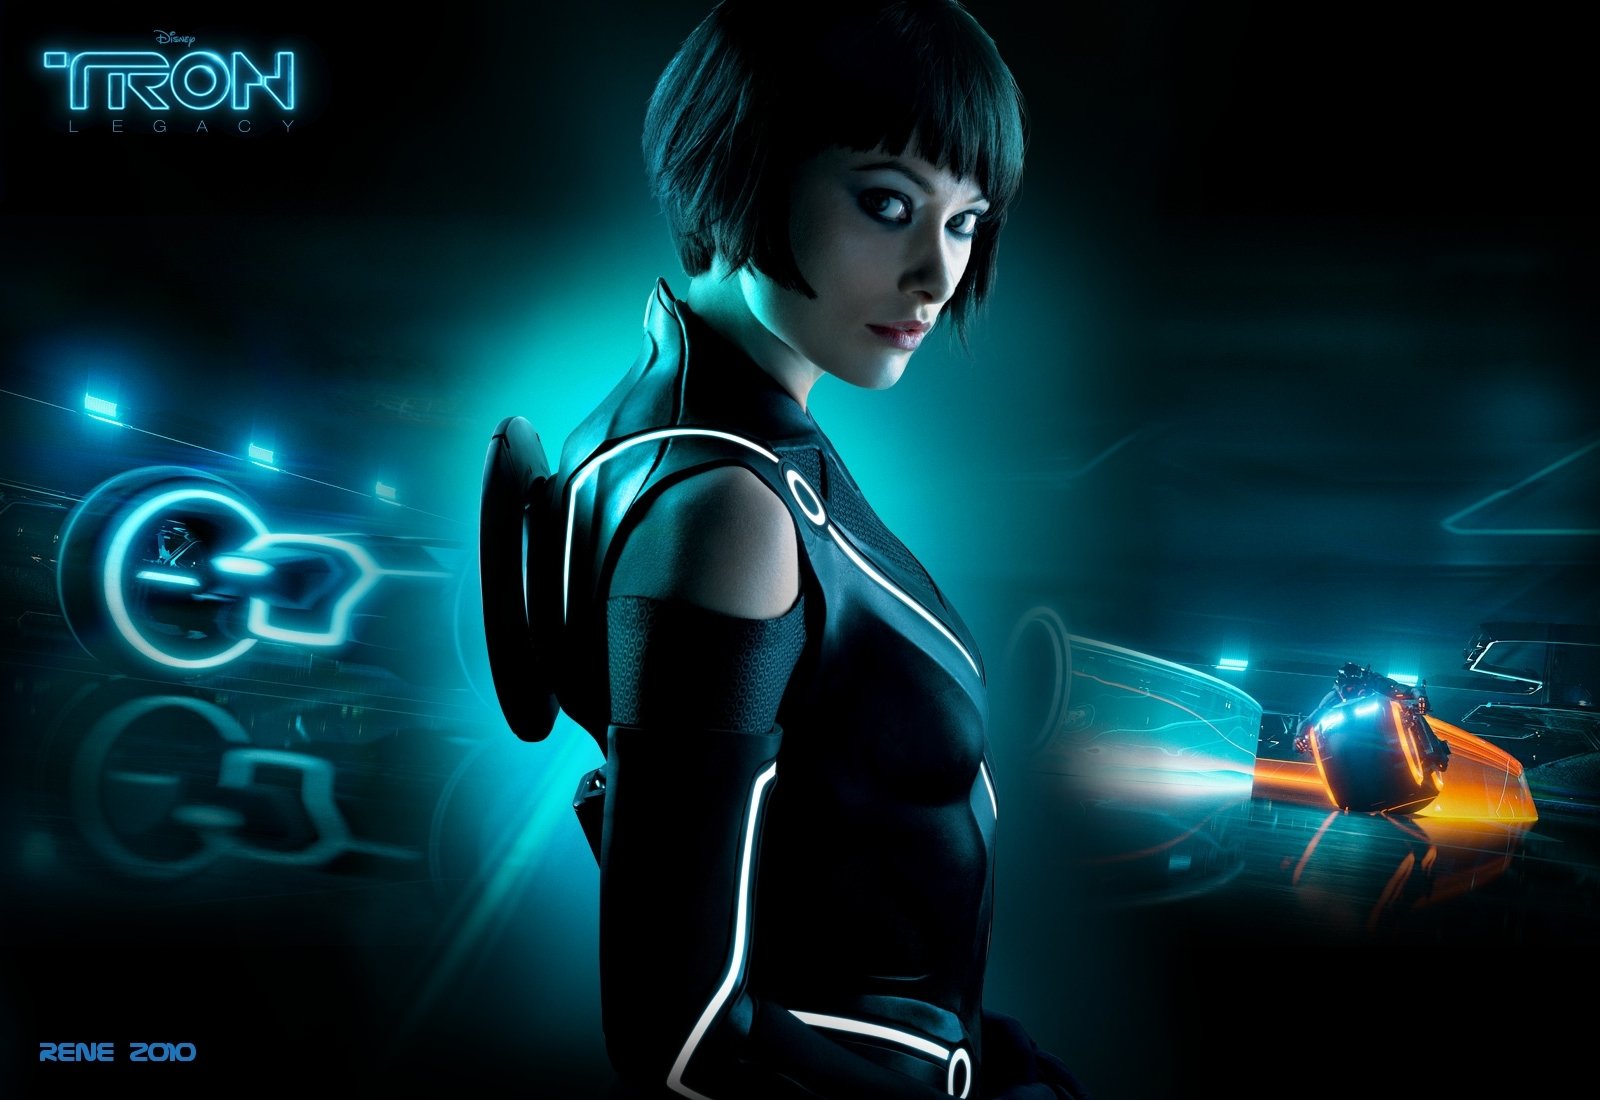 TRON: Legacy Wallpaper and Background Imagex1100